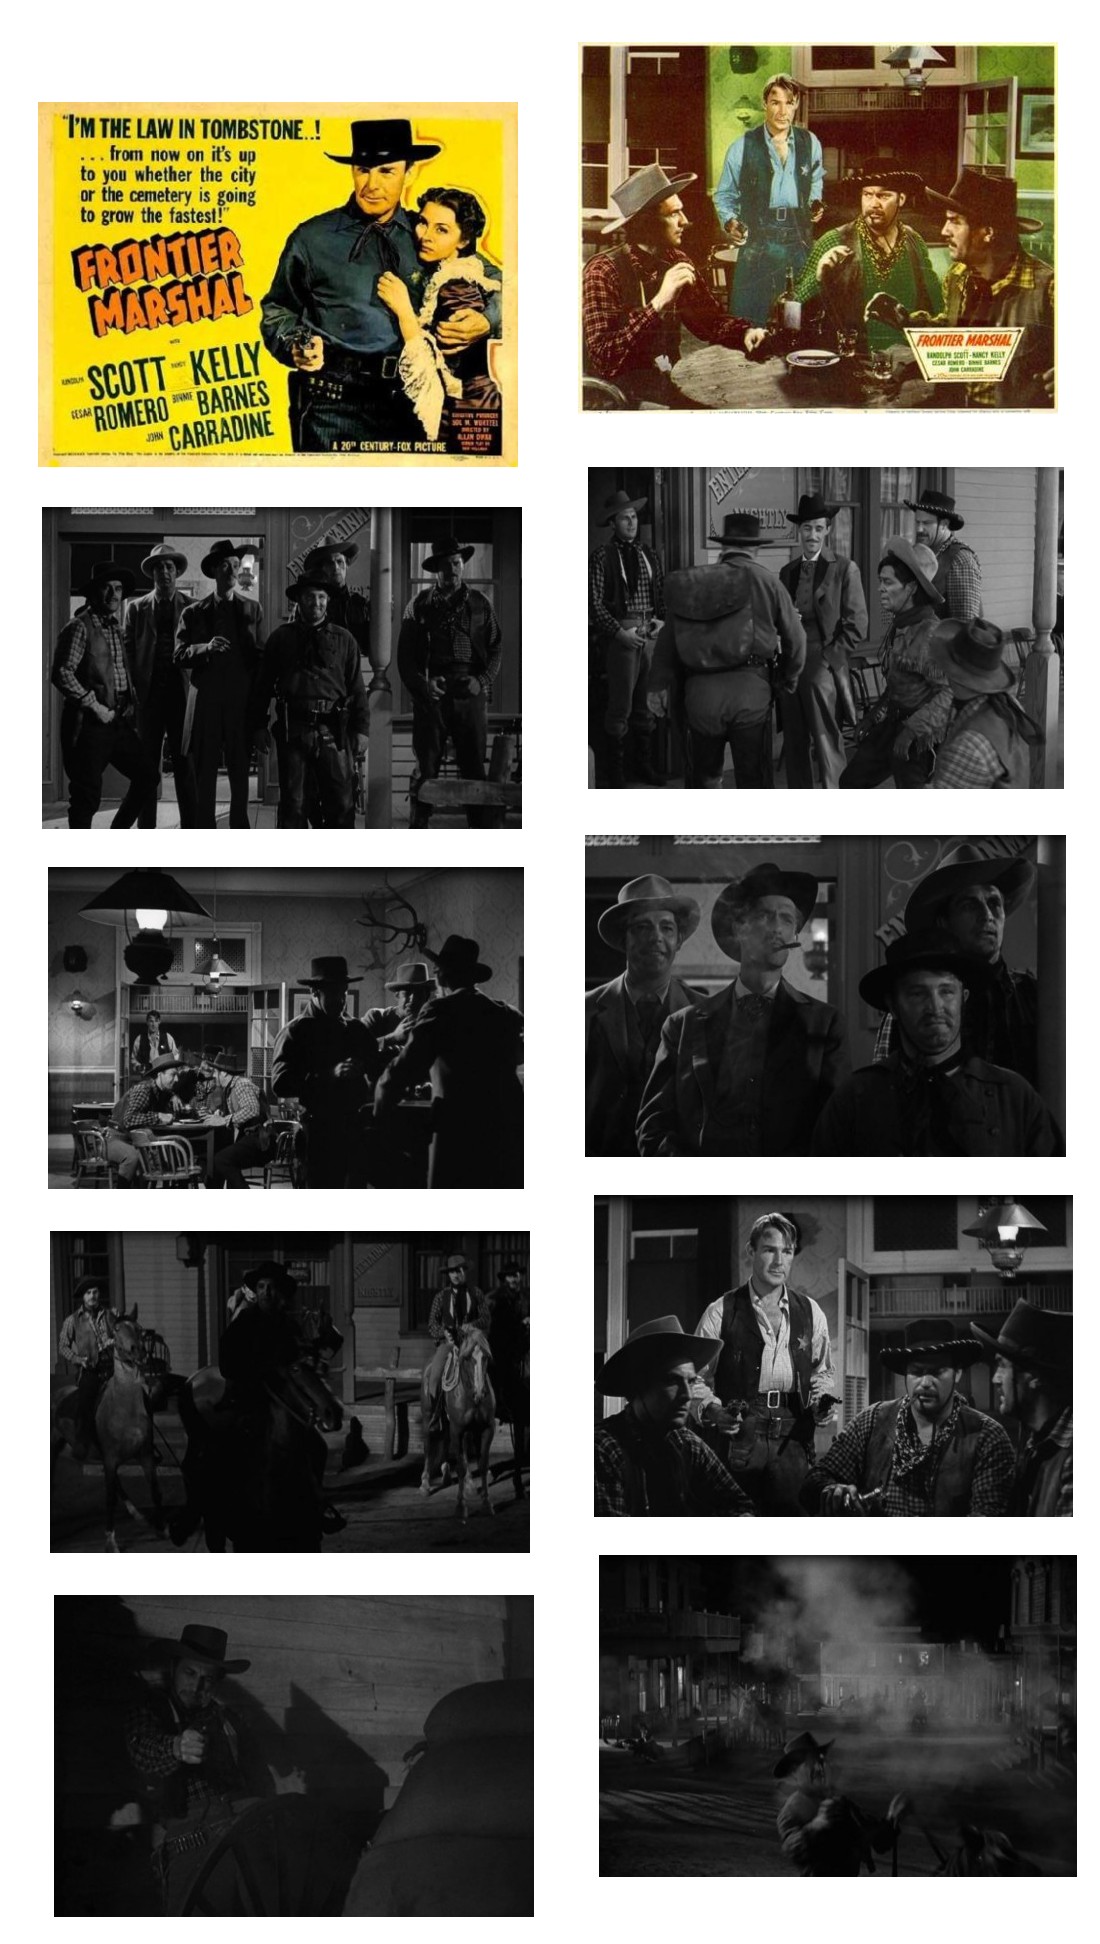 Frontier Marshal lobby cards screencaps